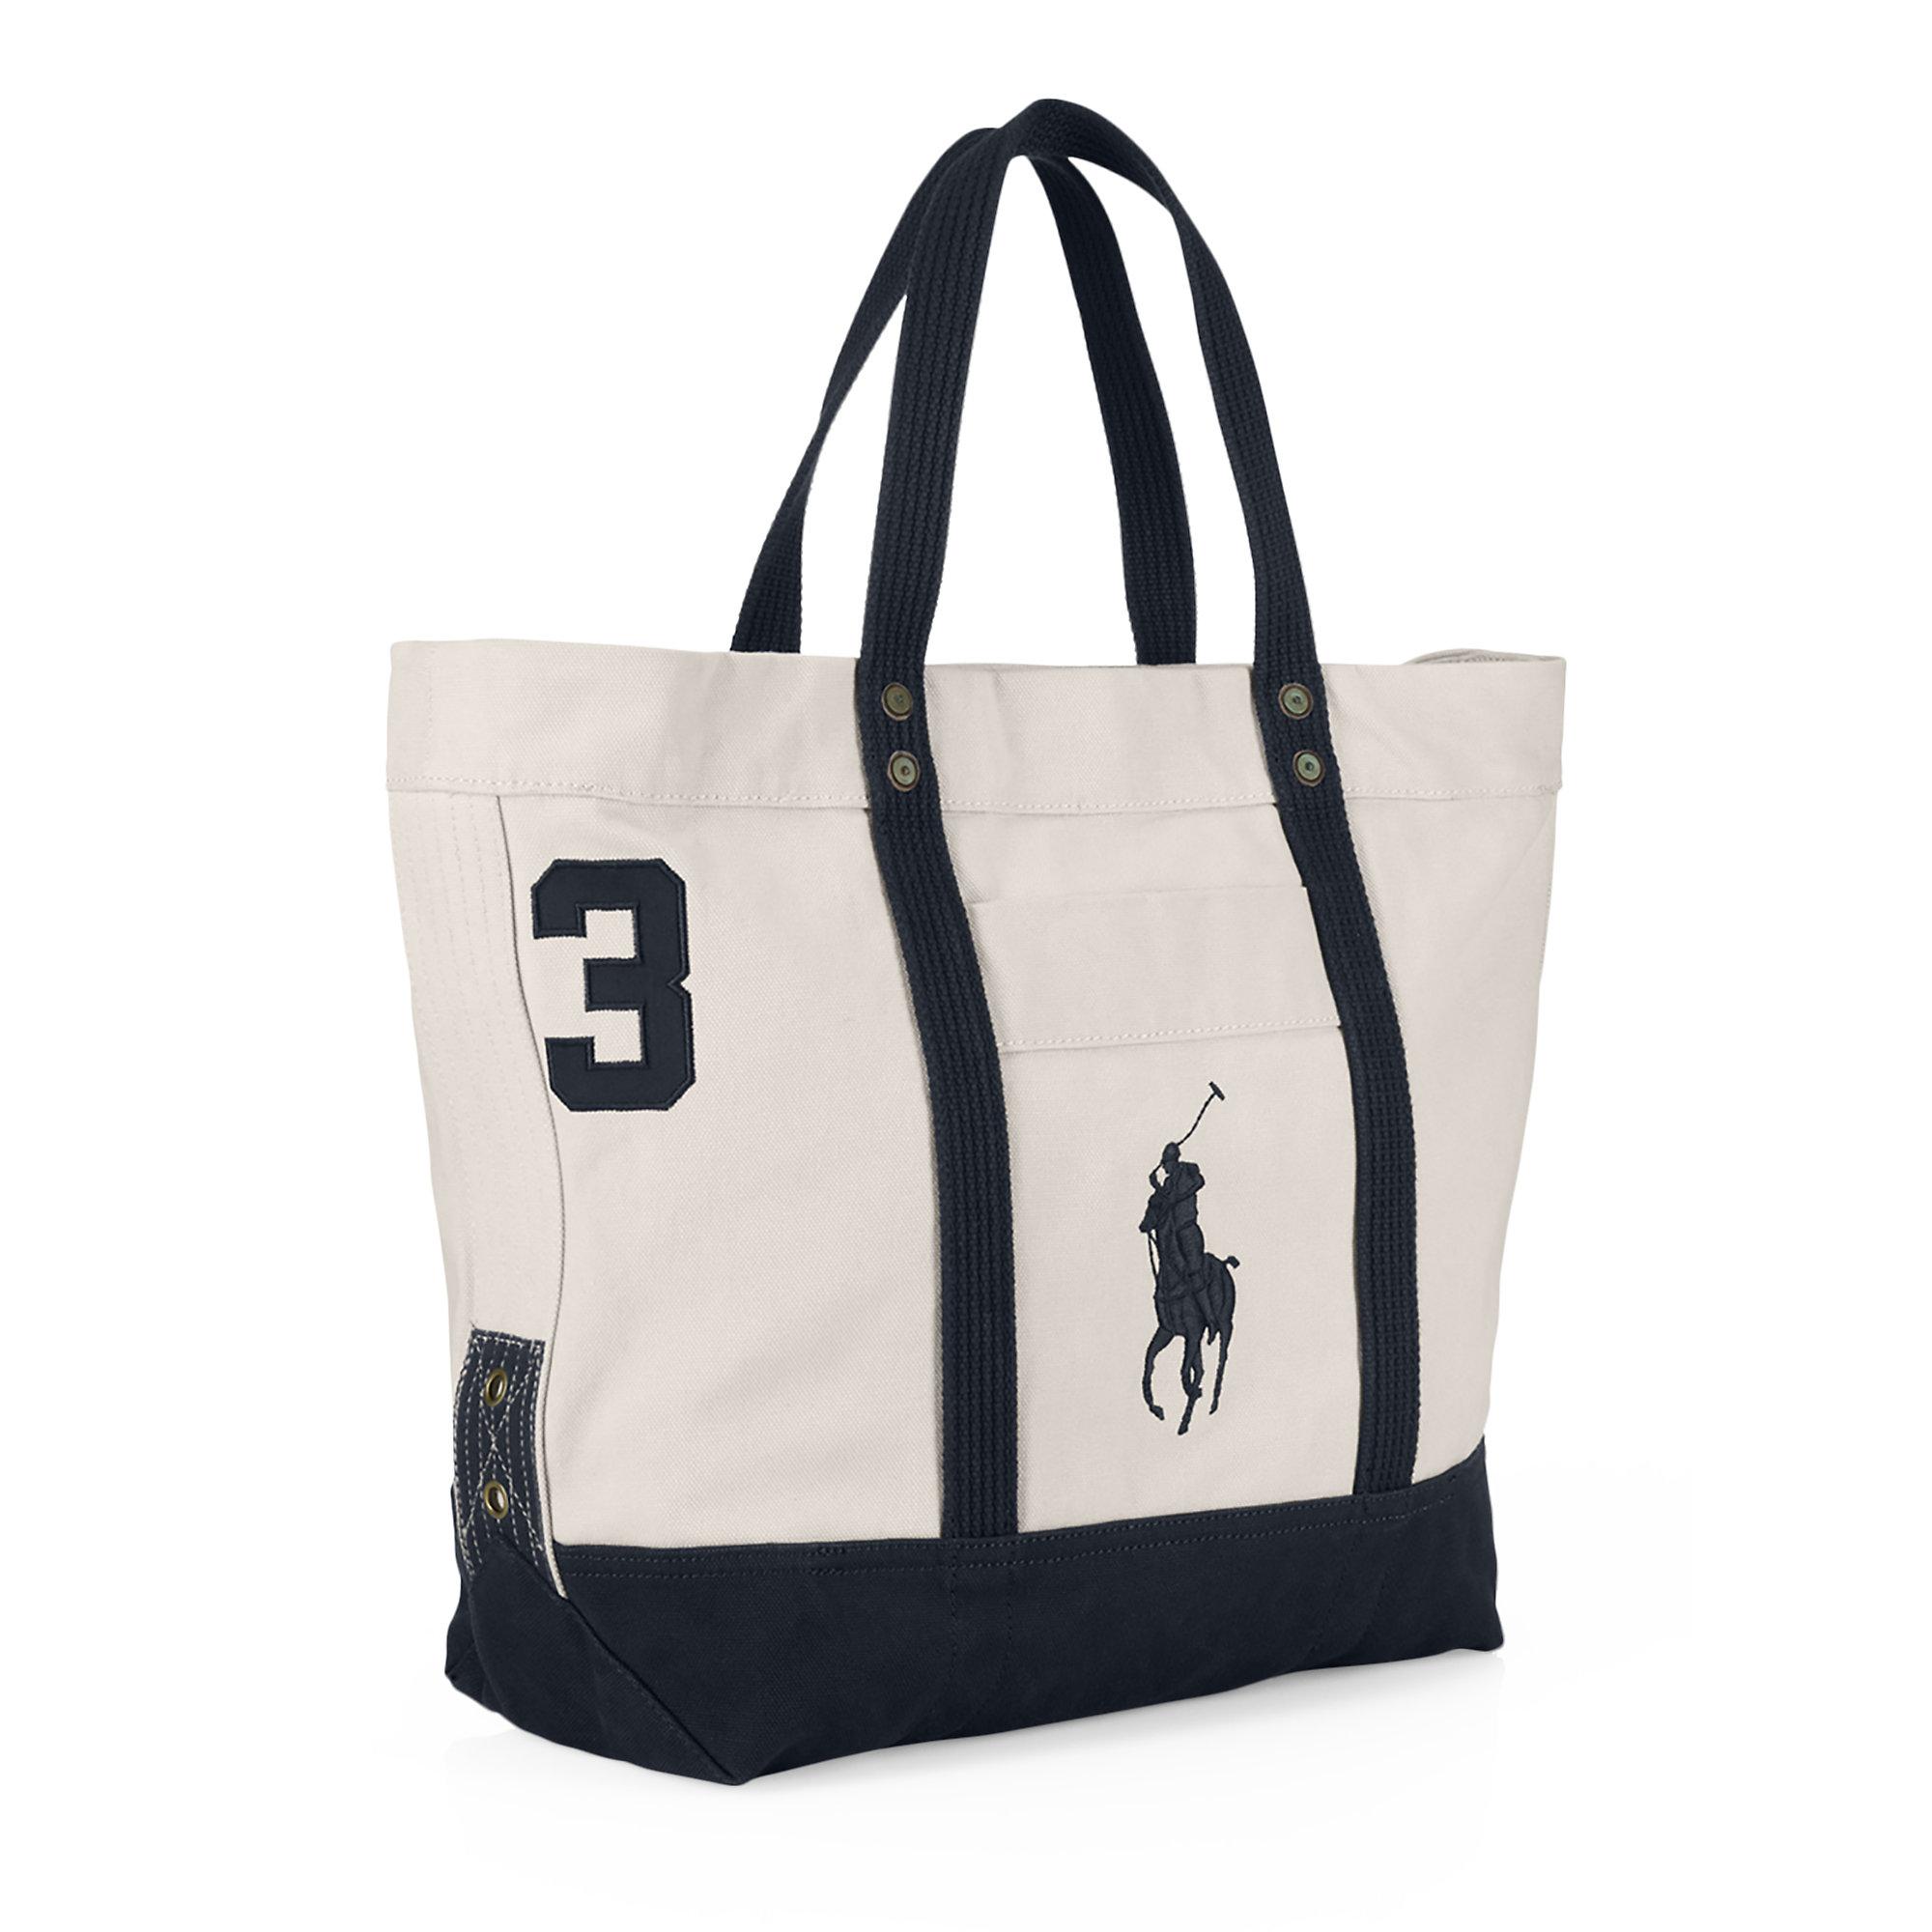 Polo Ralph Lauren Canvas Big Pony Tote in Natural/Navy (Natural 